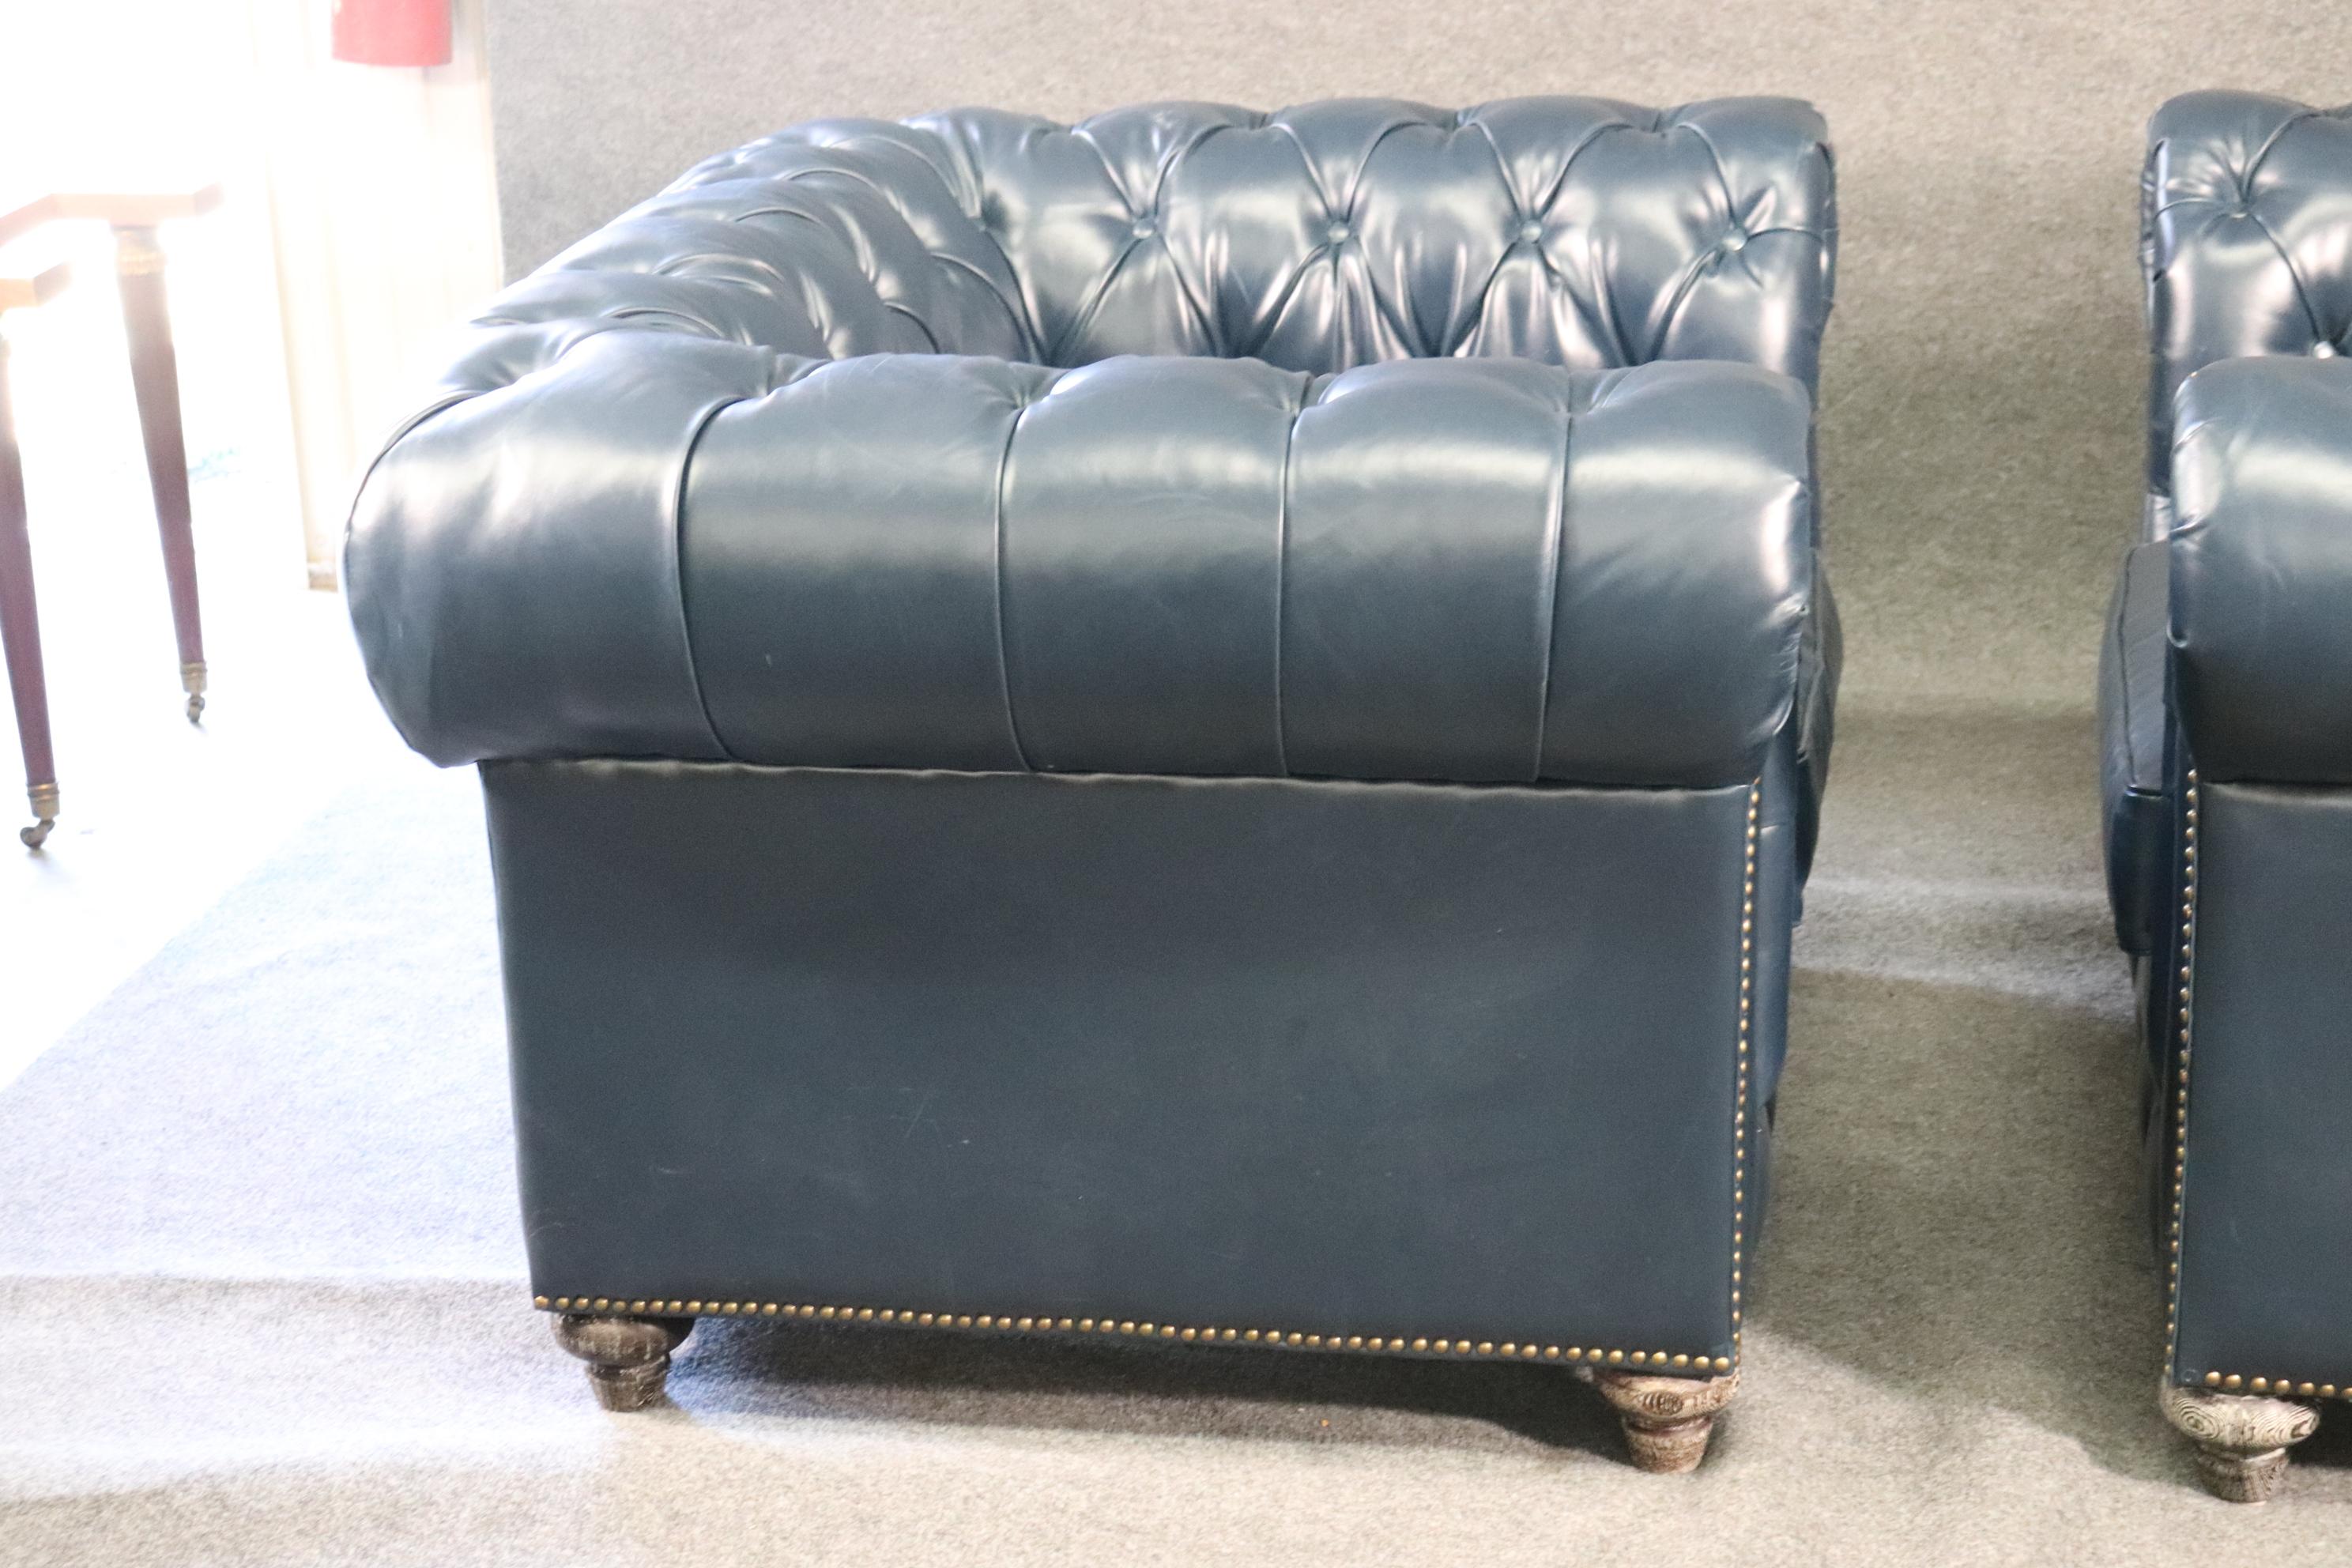 Pair High Quality Genuine Top Grain Leather Chesterfield Club Chairs Navy Blue 12